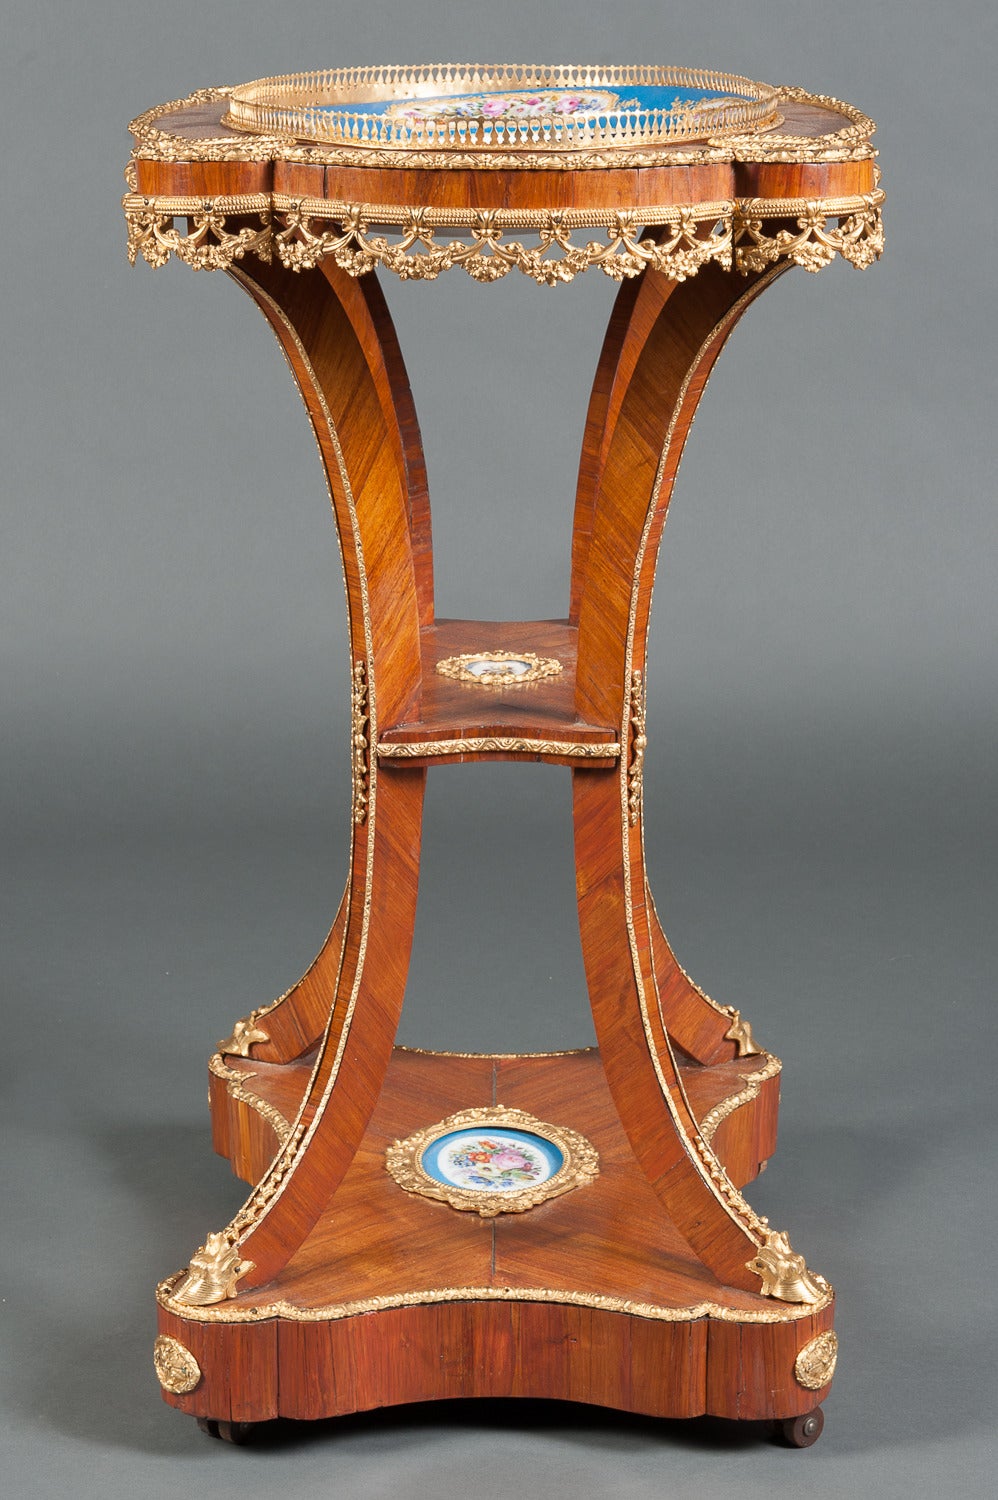 A 19th Century French Sevres Style Hand Painted Bronze Mounted porcelain side Table.

Circa 1870
 
Origin: France

Height: 32″
Width: 24″
Depth: 19″

Style: Louis XV

Material: Bronze, porcelain

Maker: Sevres Style 

Excellent Condition

Decorated